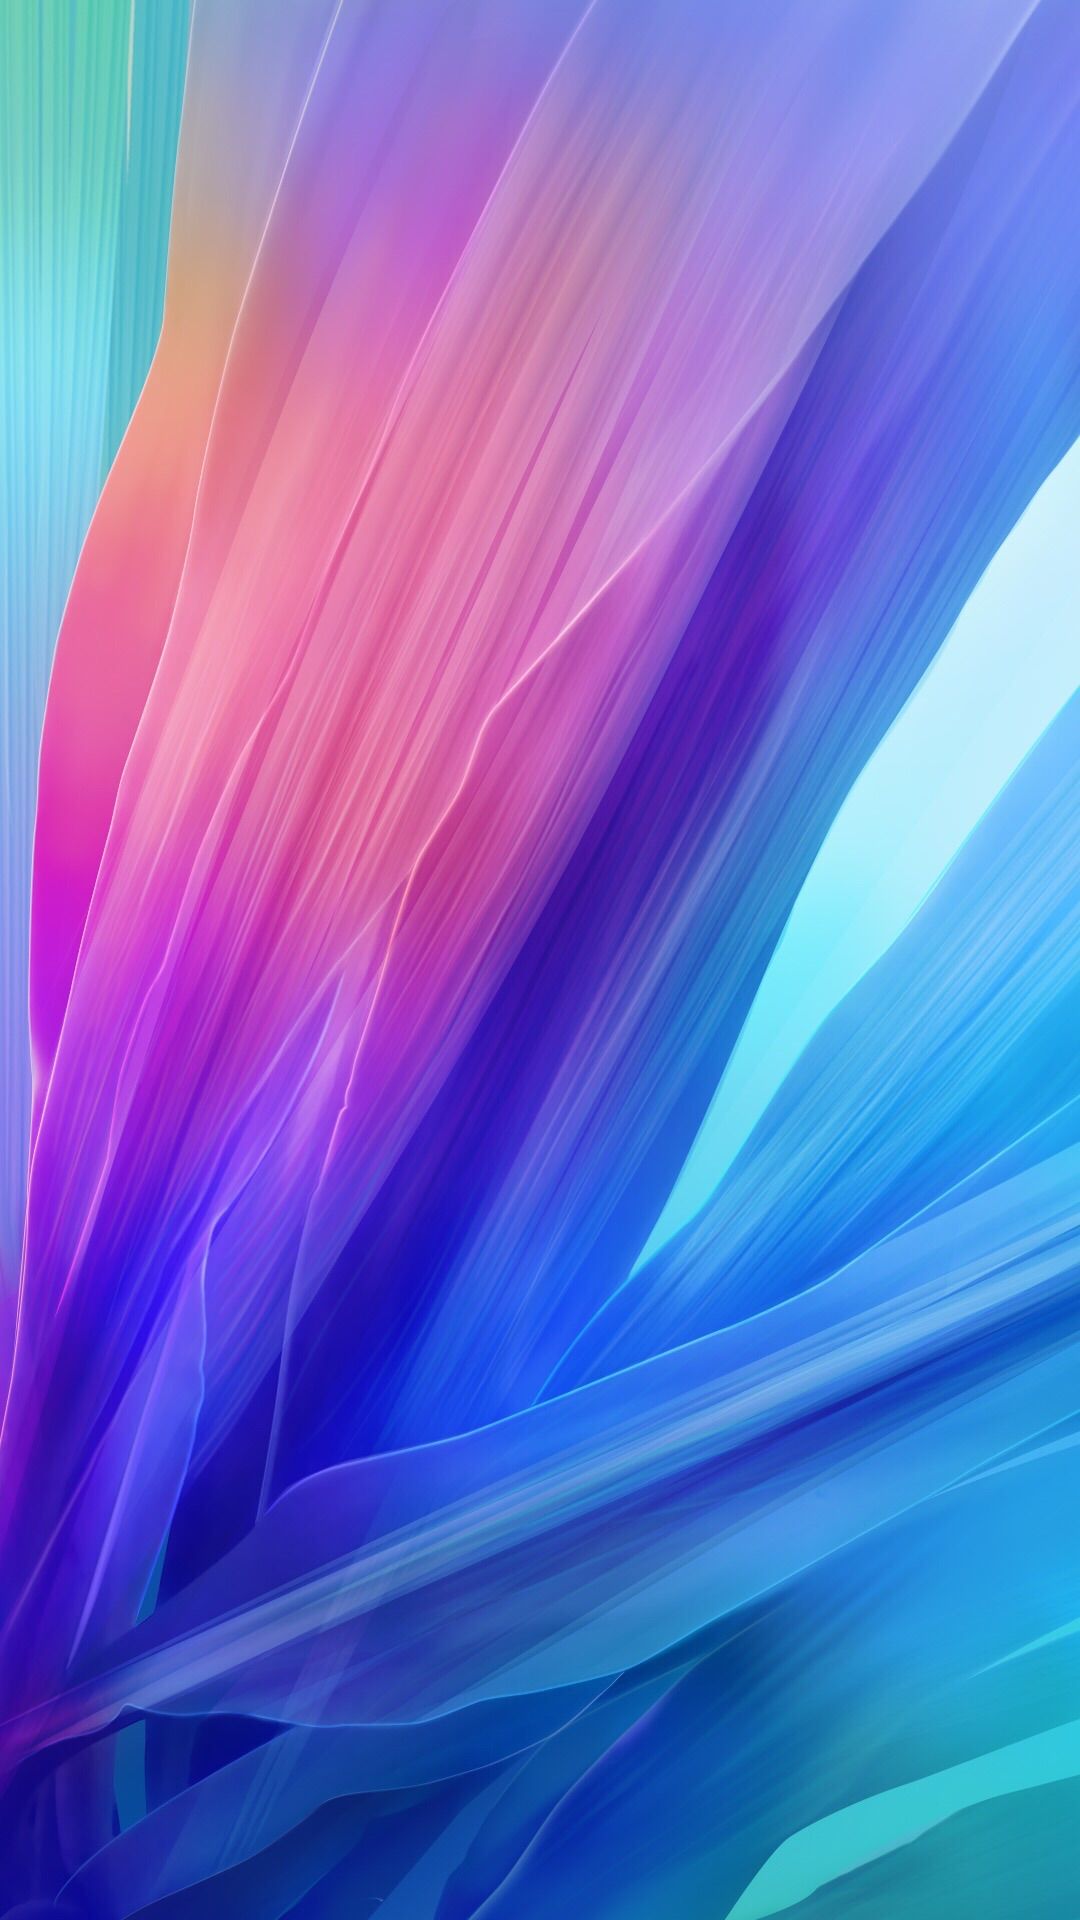 Backgrounds For Iphone 7 Plus